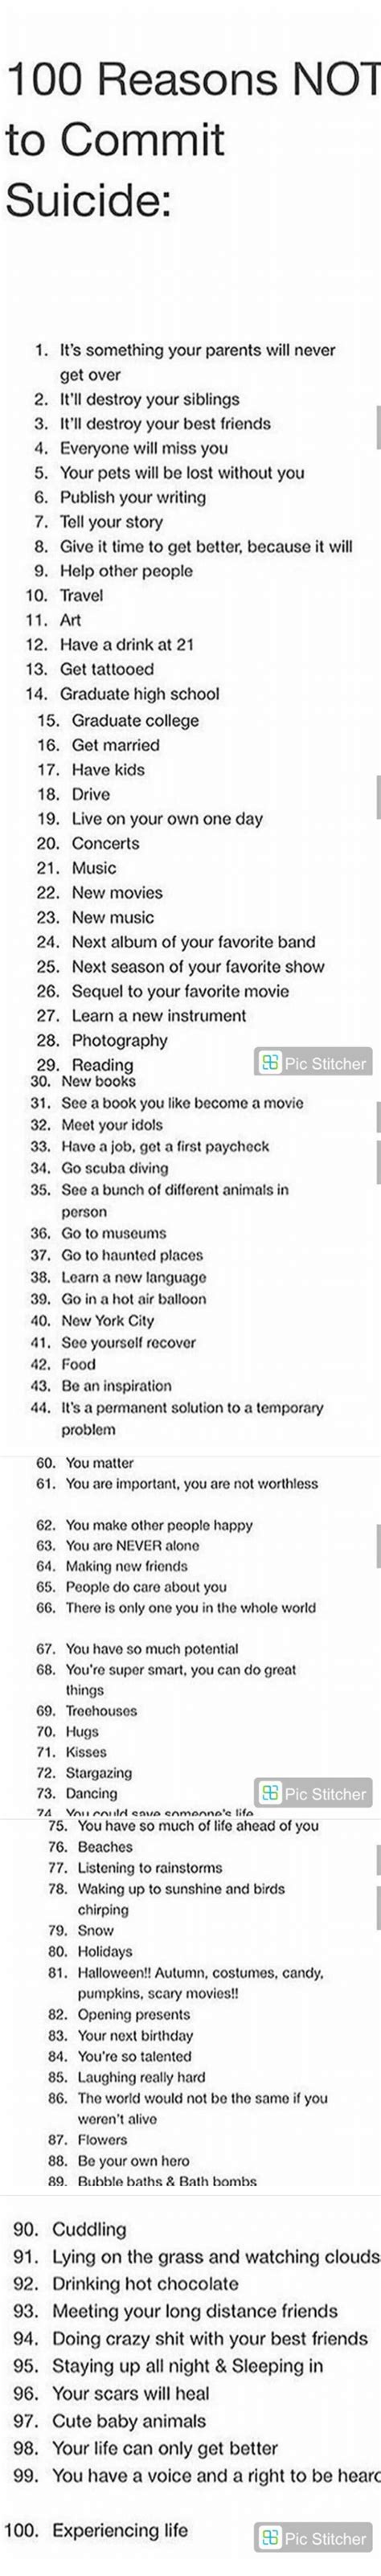 100 Reasons Not To Commit Suicide 1 Its Something Your